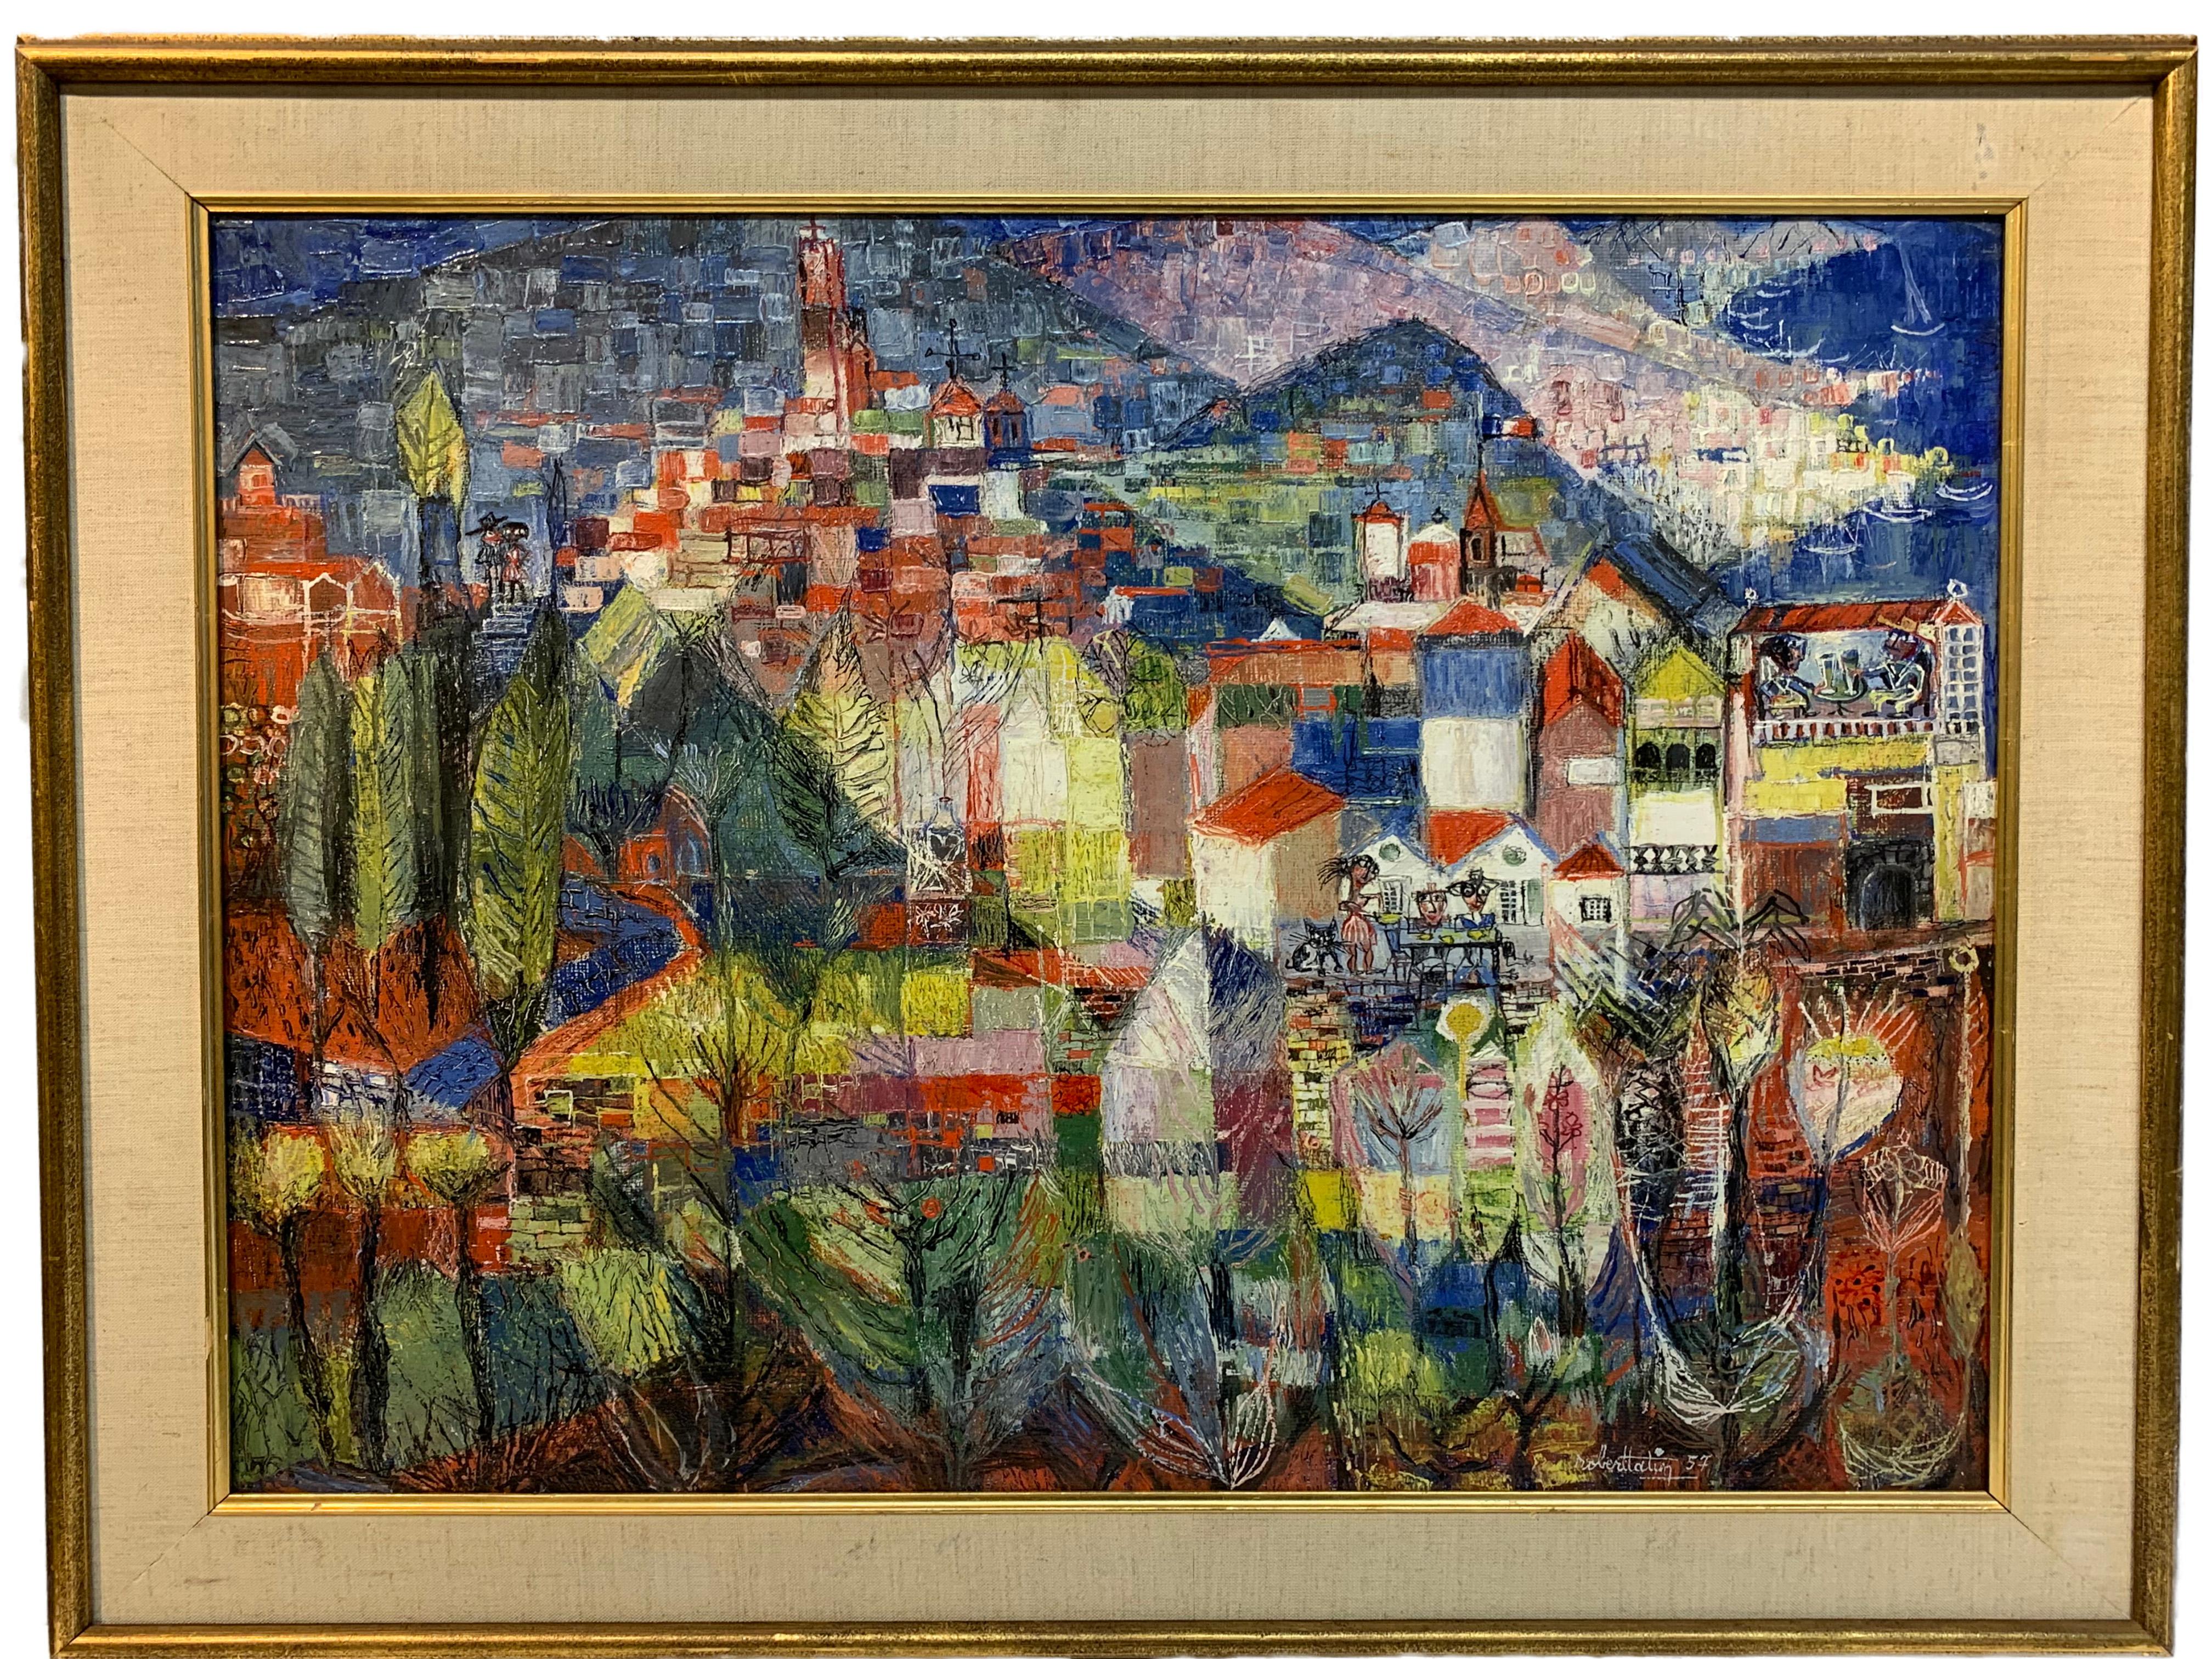 Robert Tatin Landscape Painting - Eccentric Colorful Painting of a Town by the Mountains 